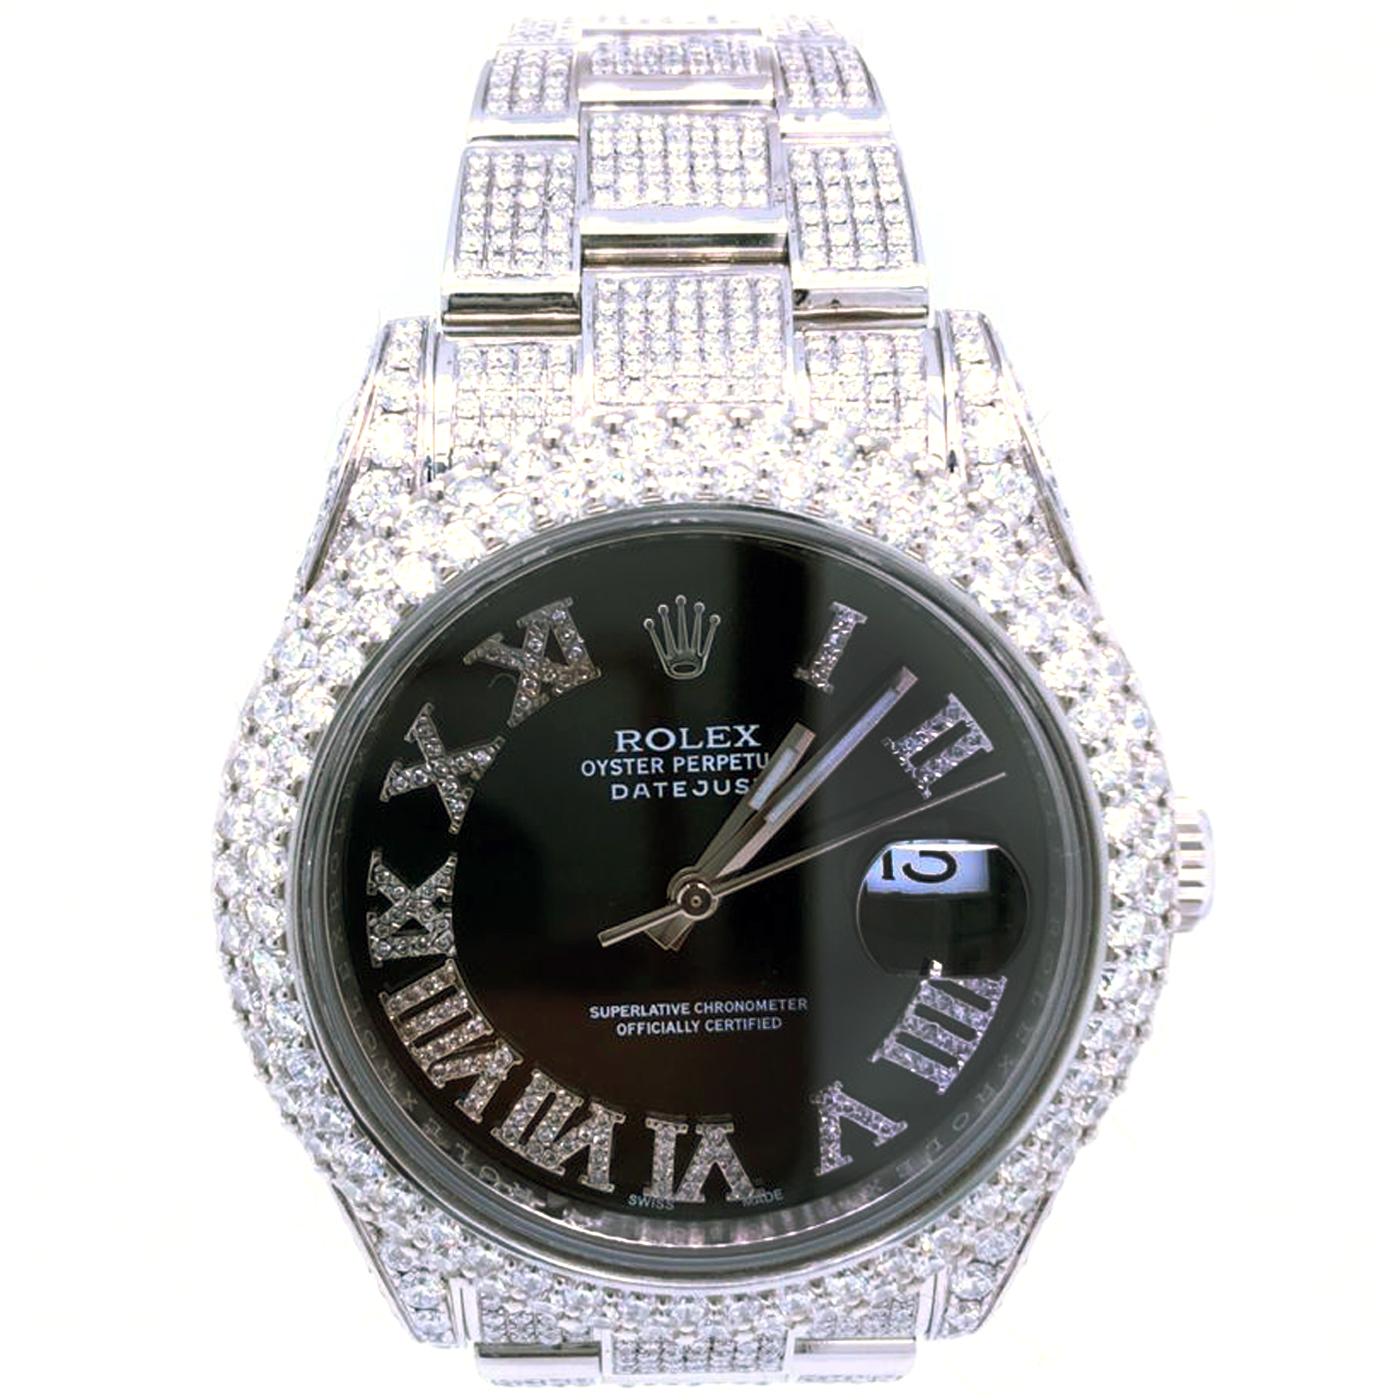 A Beautifully Customized Pave Diamond Dial Datejust 41mm Watch with Roman Numerals!!! This Watch Has Been Set Wonderfully and Is Fully Iced Out! the Diamonds Are Top Quality and the Watch Comes with Box and Papers.

Details:
Brand: Rolex
Model: